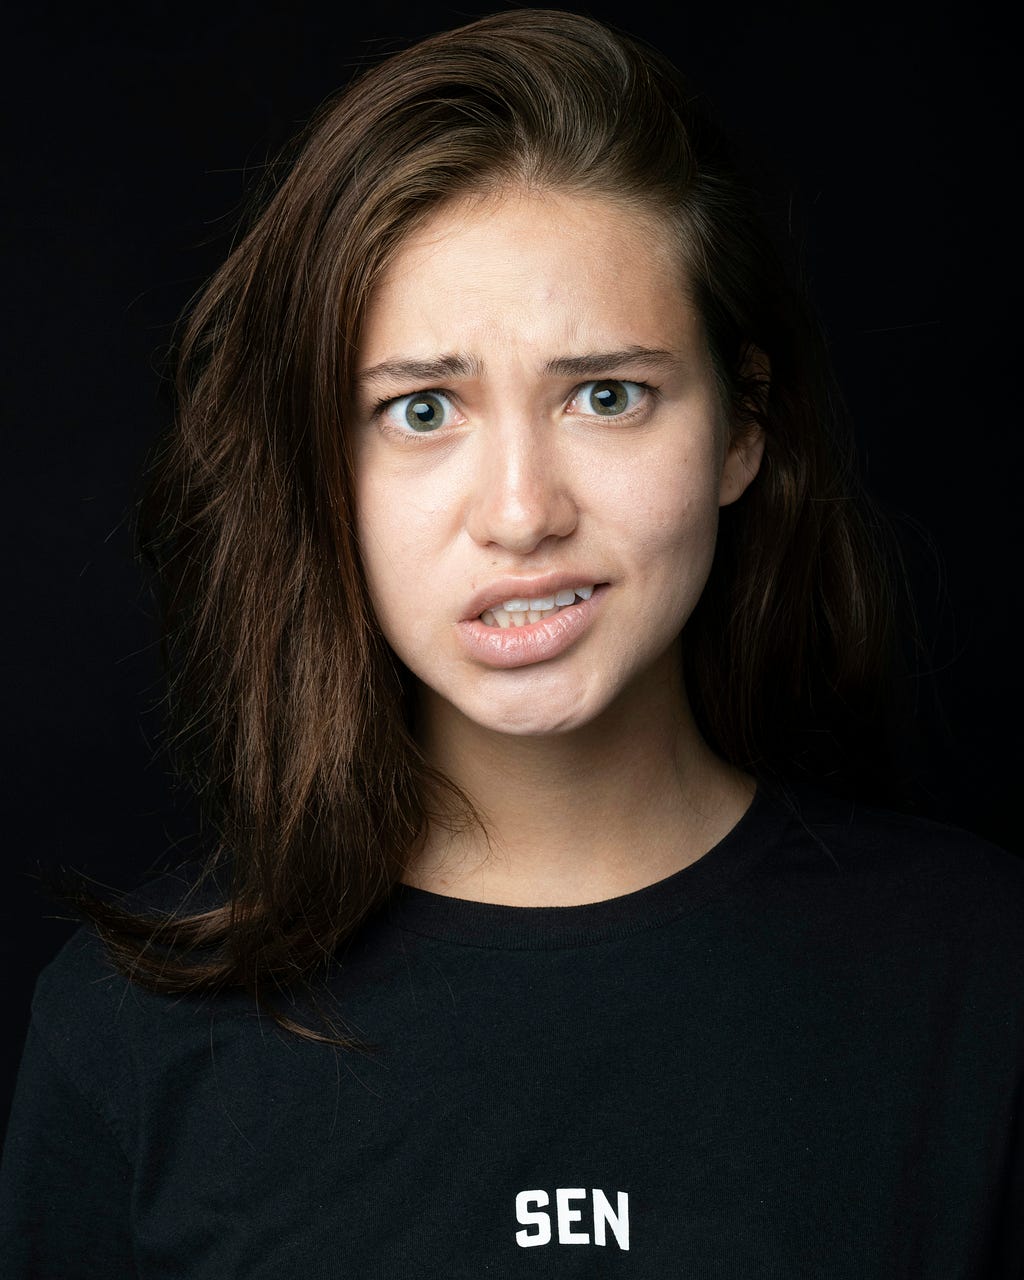 A 20-something year old Caucasian girl with brown hair, wearing a black shirt and staring straight ahead with a confused look on her face.